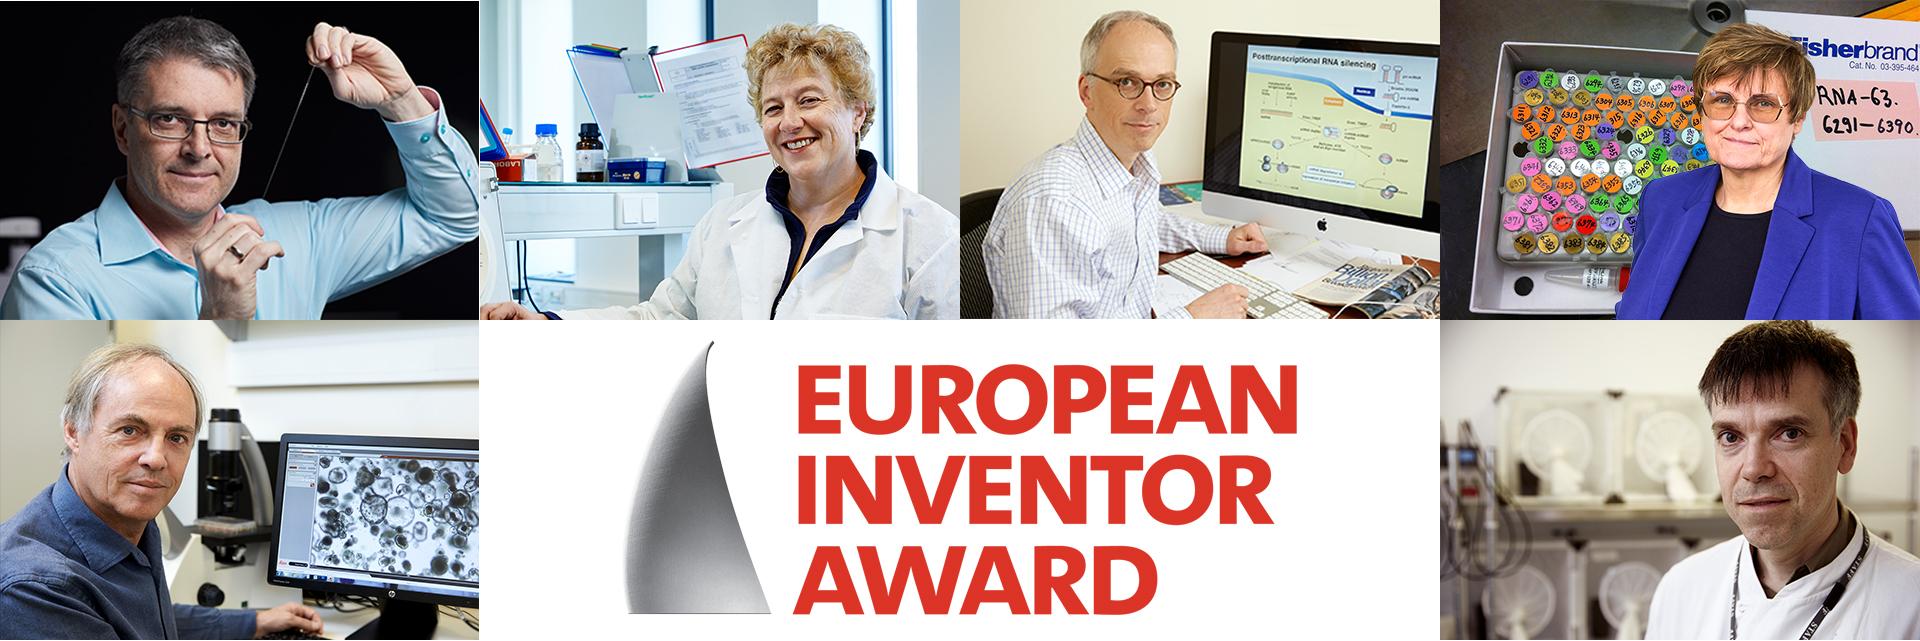 Finalists from the European Inventor Award